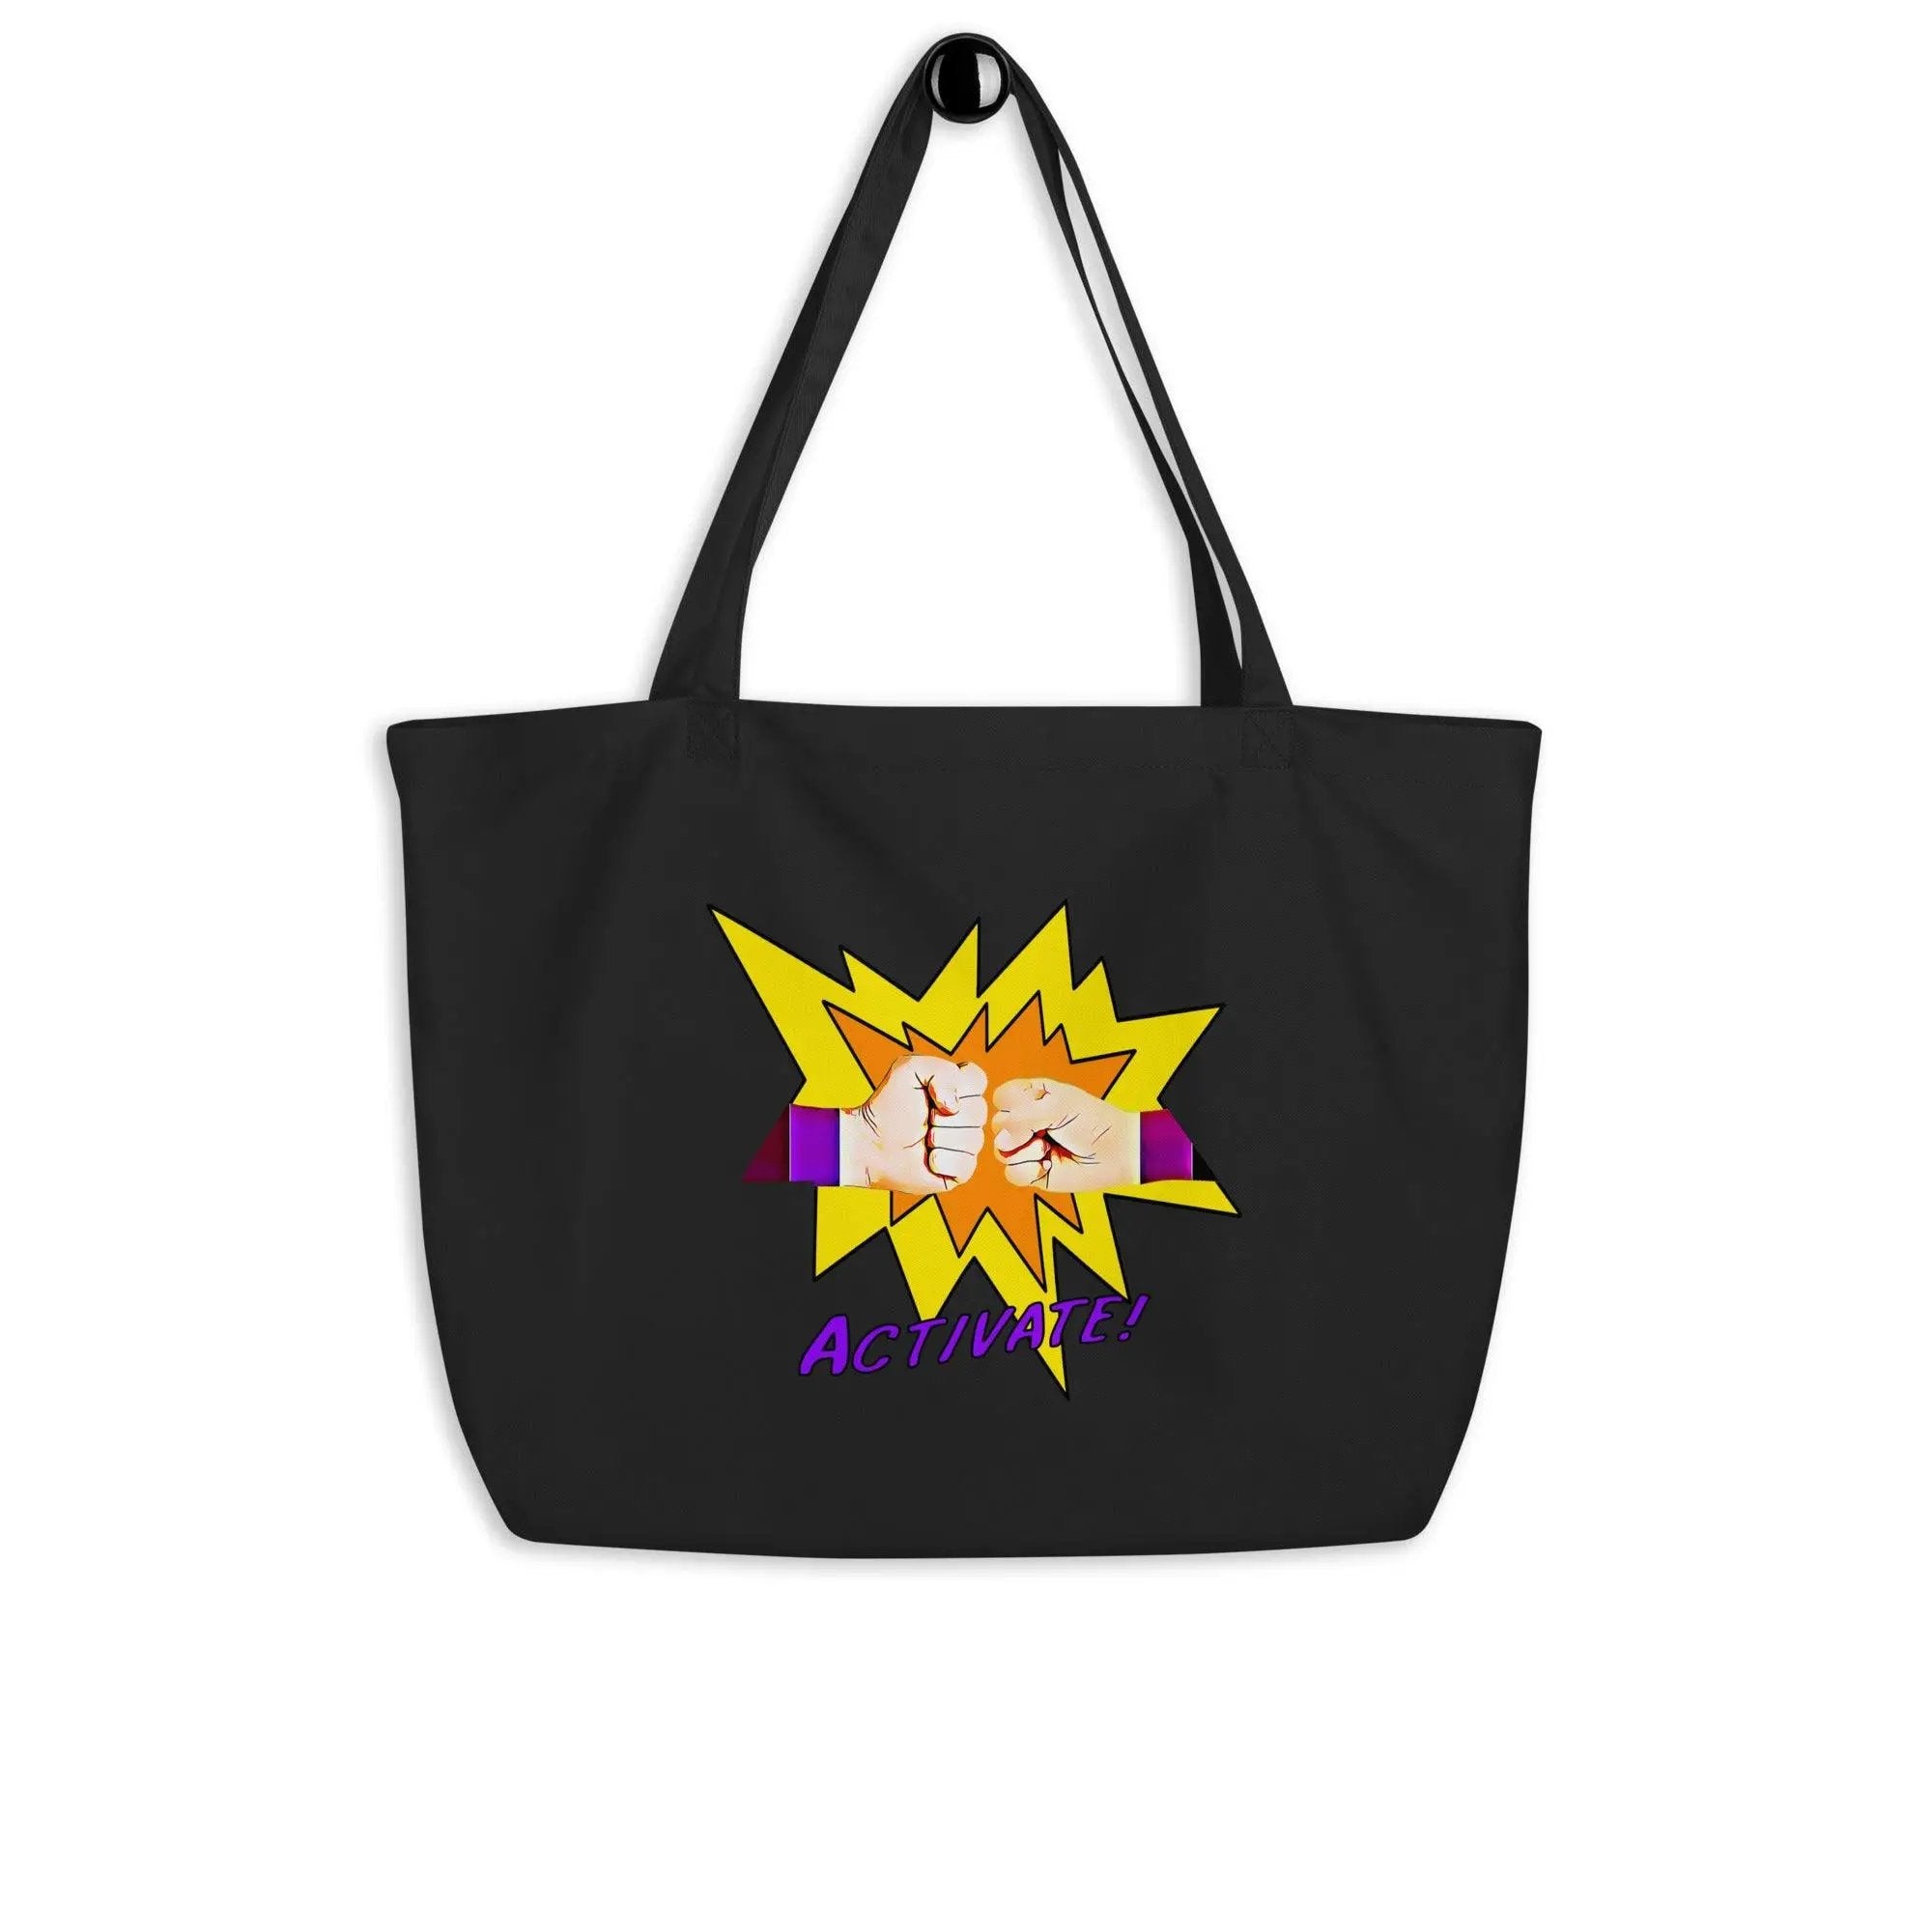 Activate! Large organic tote bag